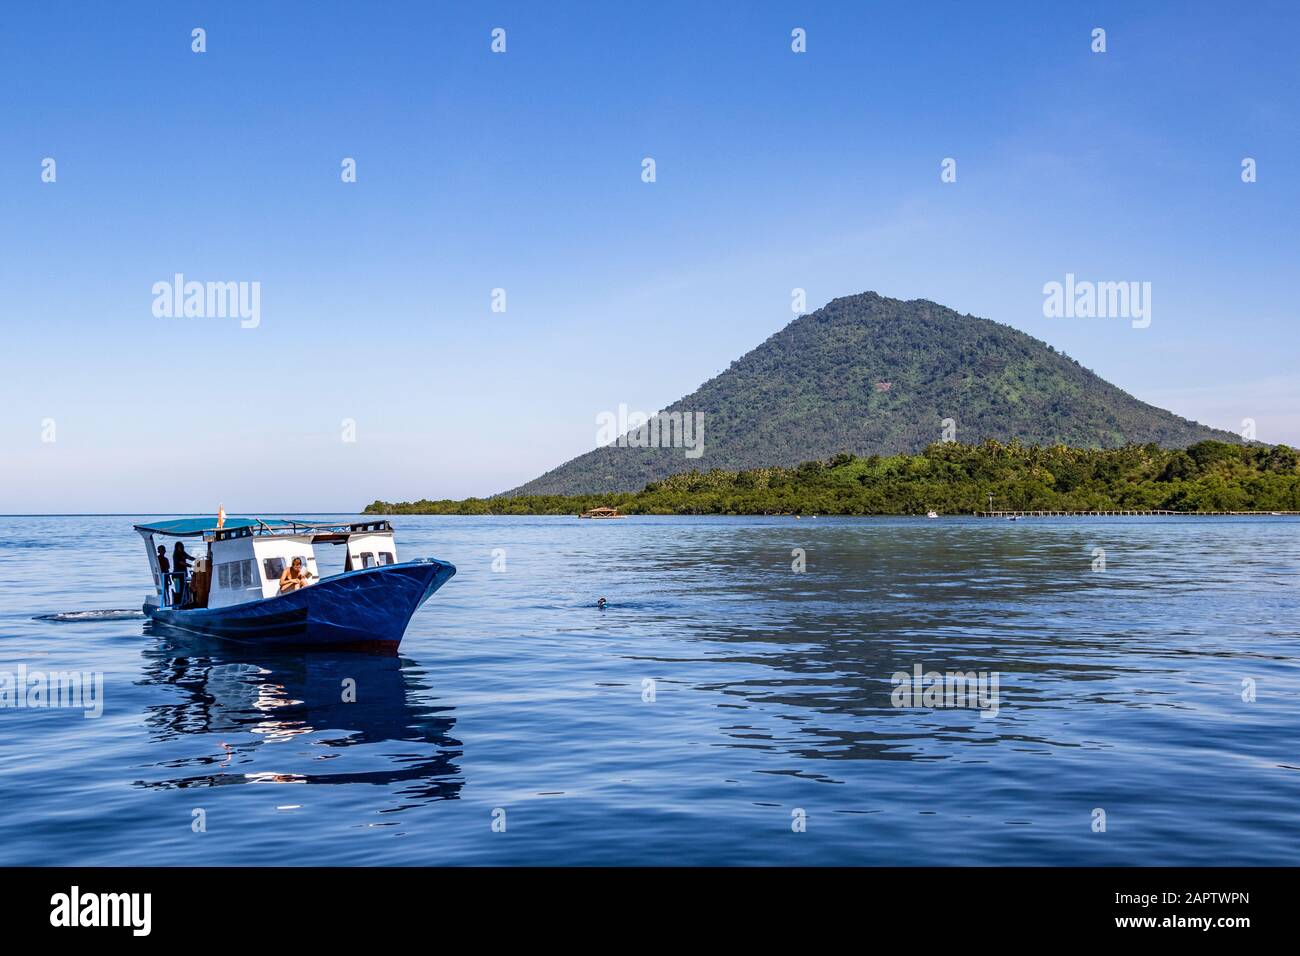 Diving boat with Manado Tua in the background, Bunaken National Marine Park; North Sulawesi, Indonesia Stock Photo